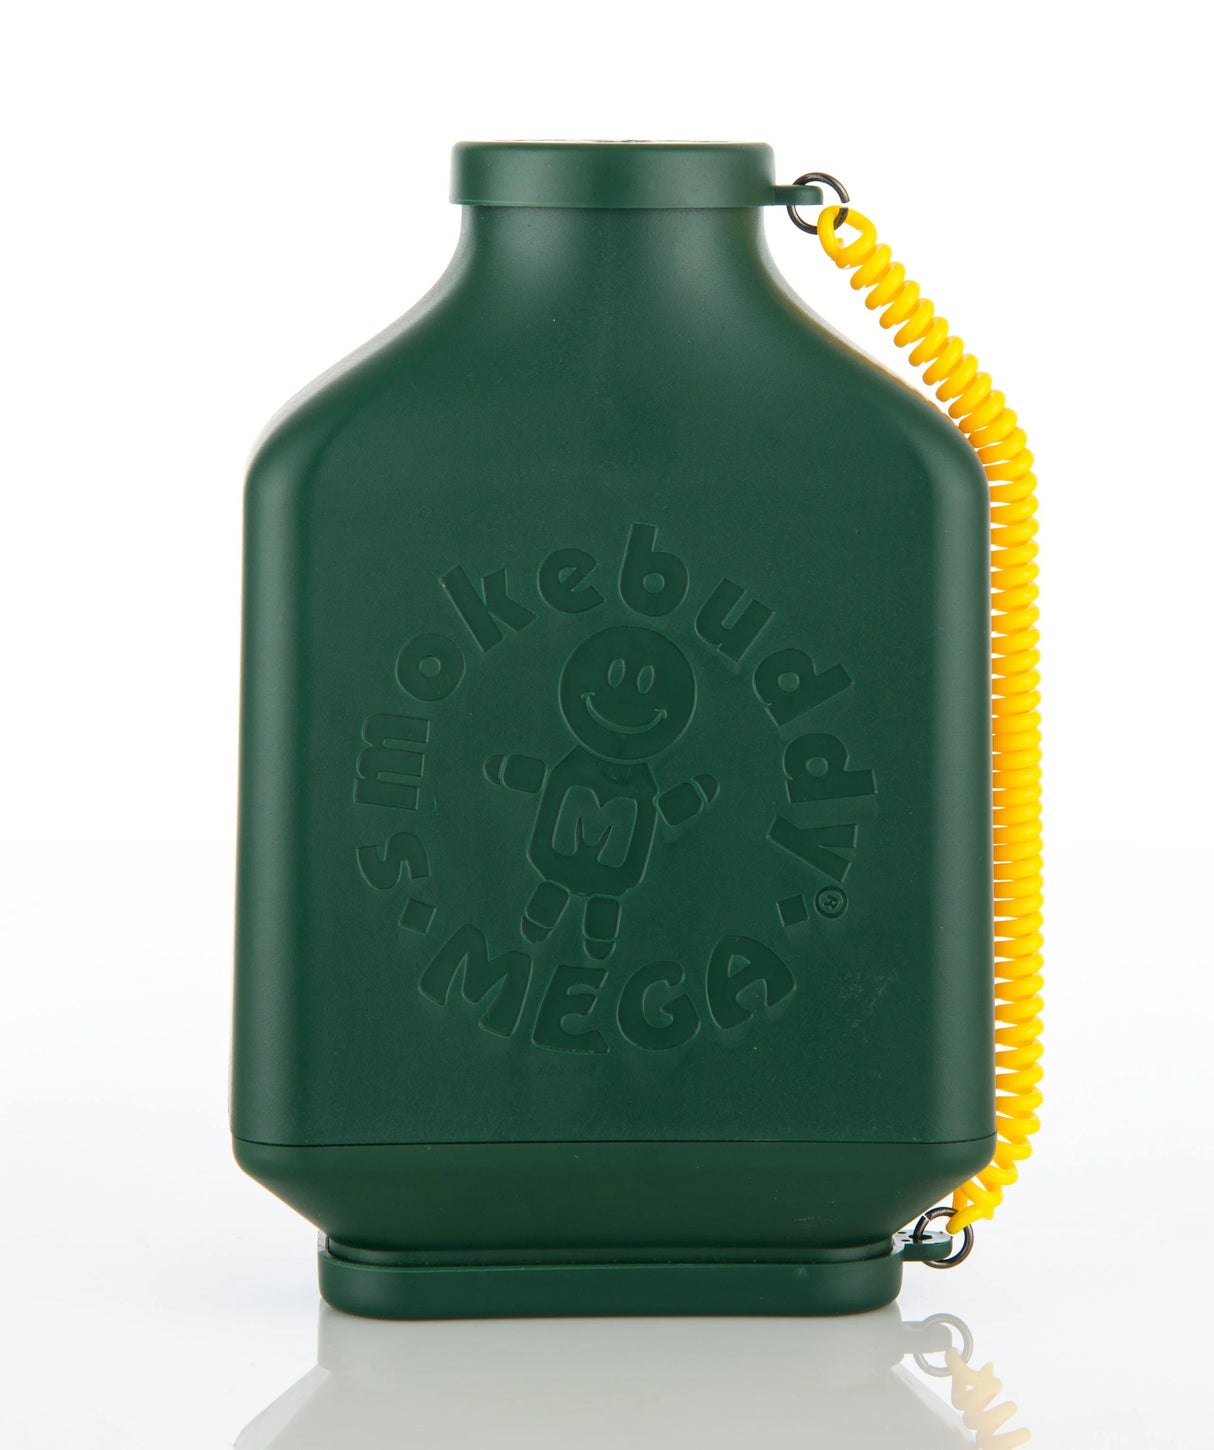 Smokebuddy Mega Personal Air Filter in Green, Front View with Yellow Keychain